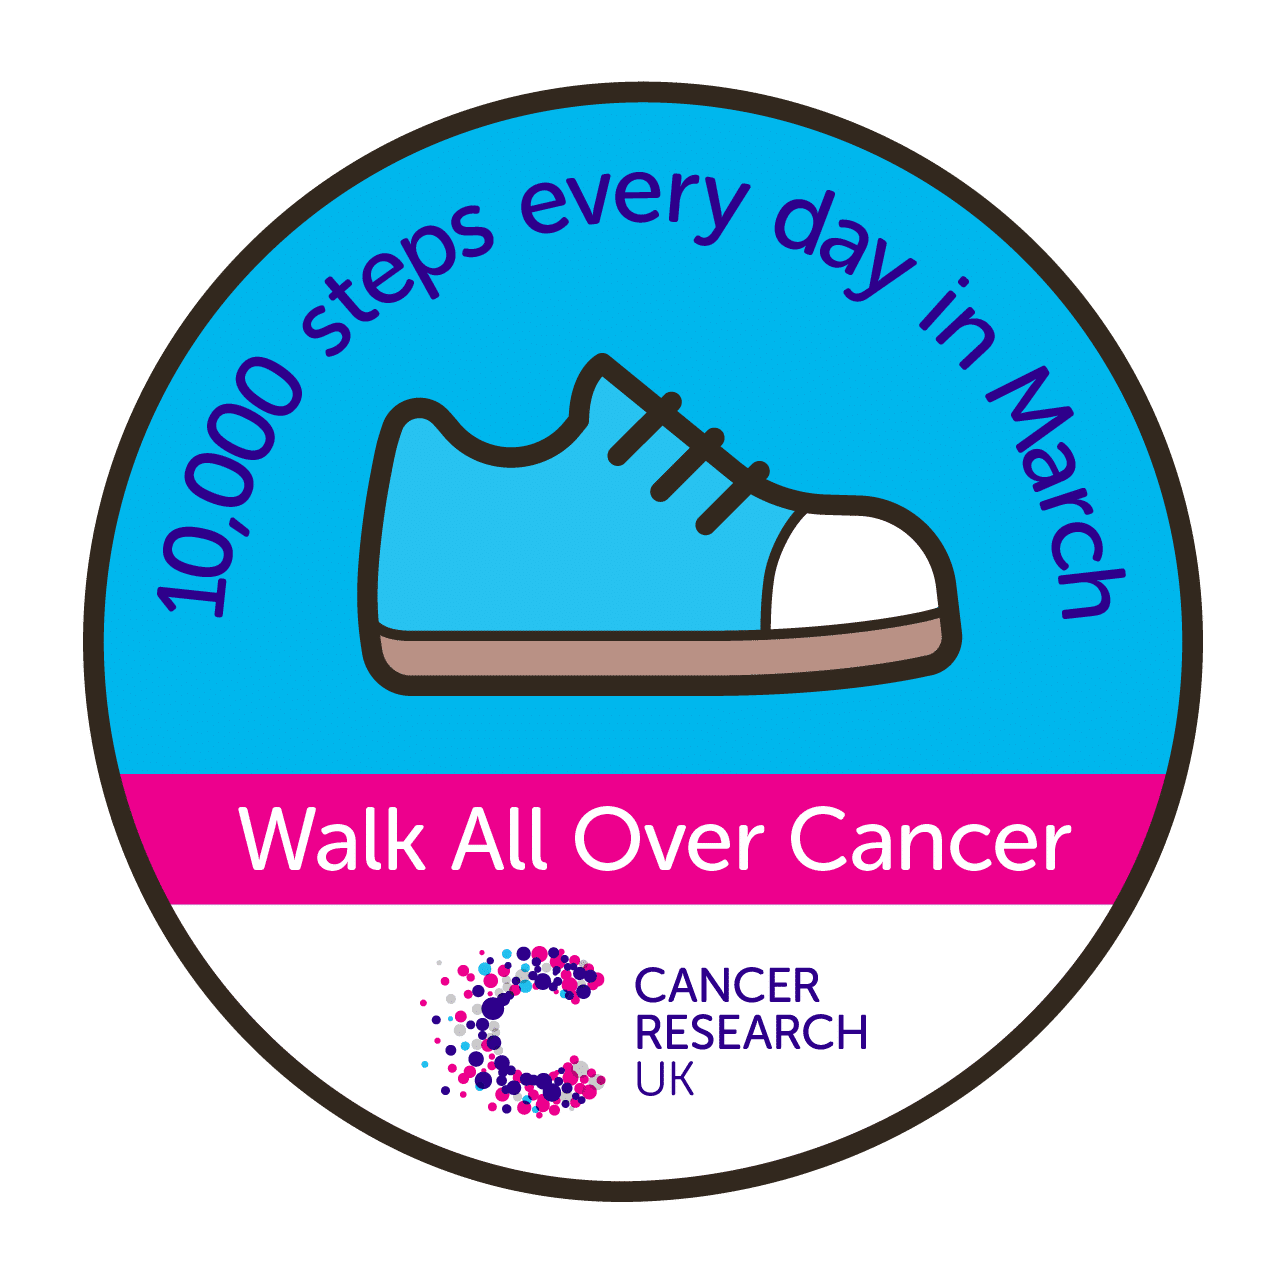 Walk All Over Cancer